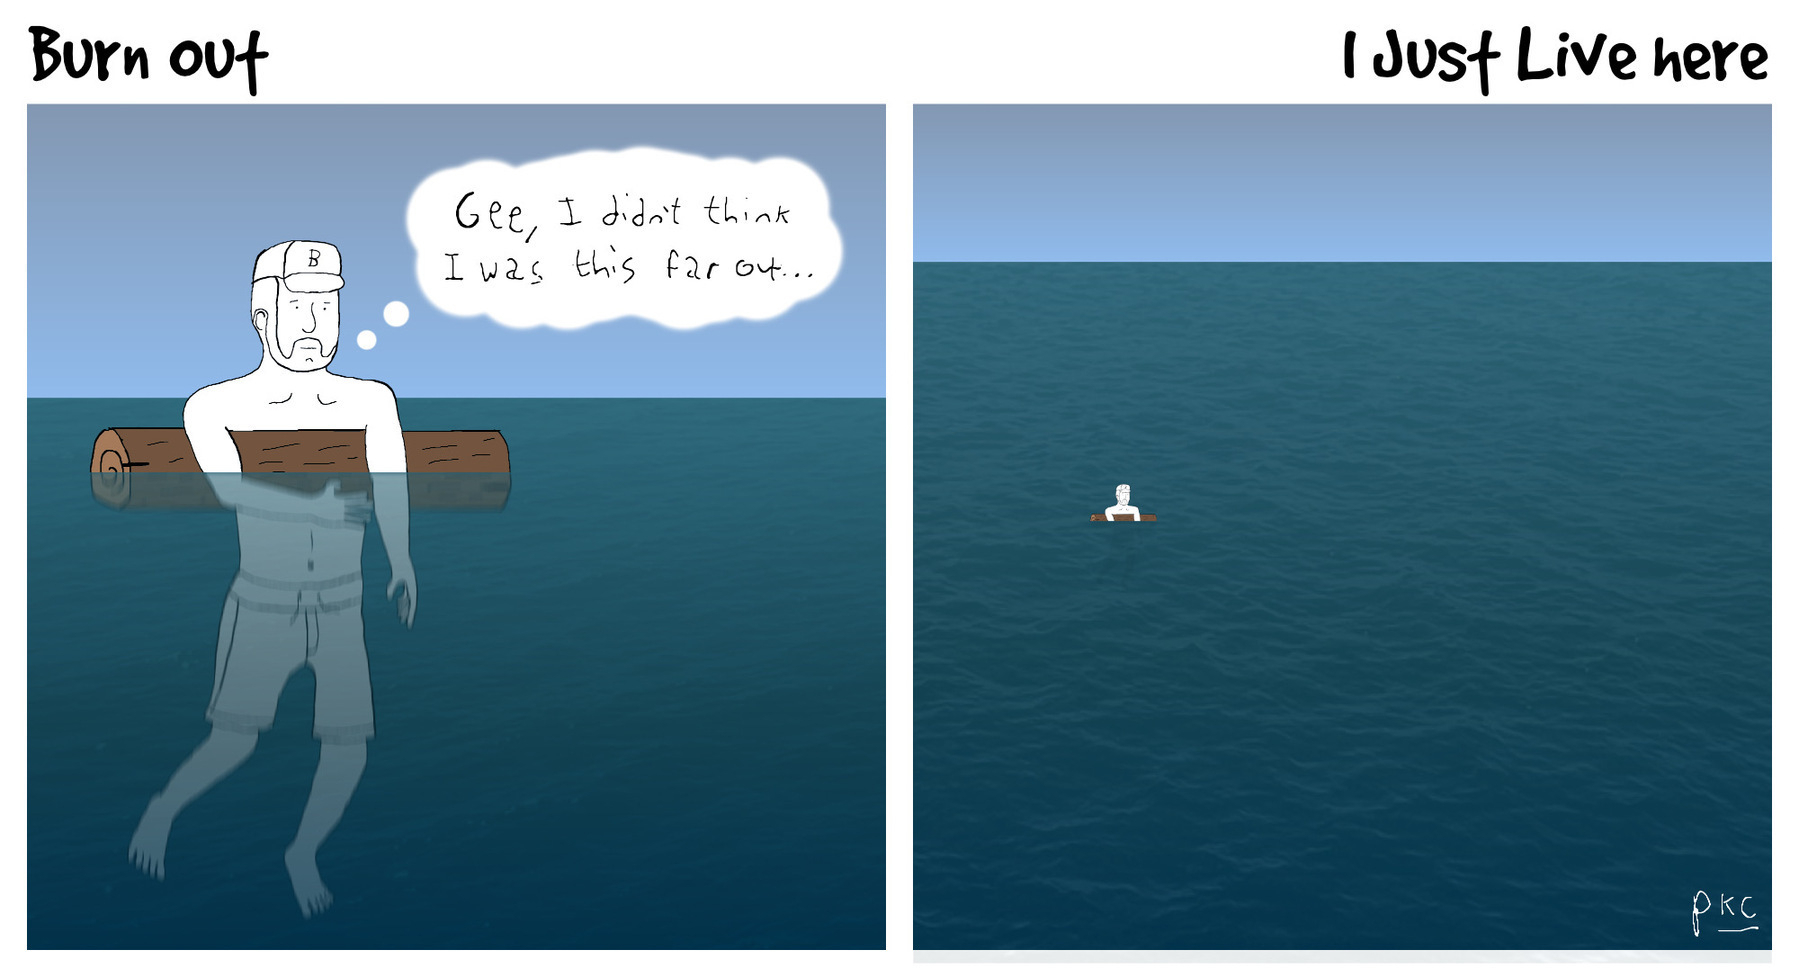 Burnout. Panel 1: Man floating on log, thinking “gee, I didn’t know I was this far out.” Panel 2: Zoom out to man being lost at sea.